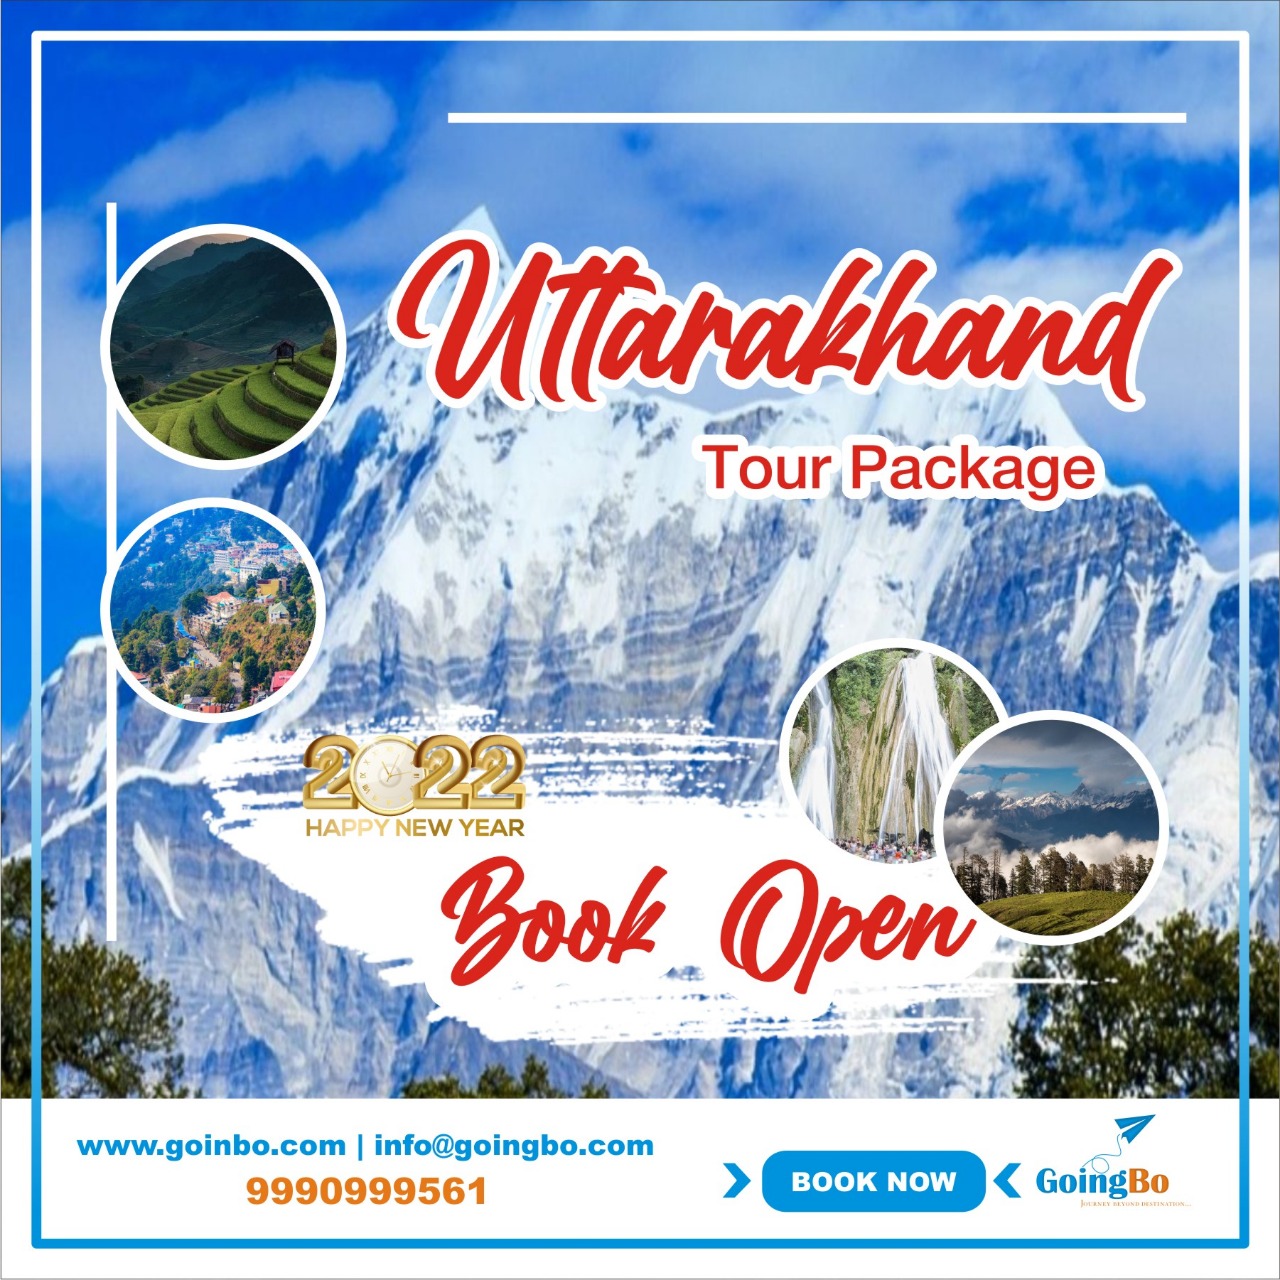 How to make Uttarakhand tour an awesome gateway in 2022